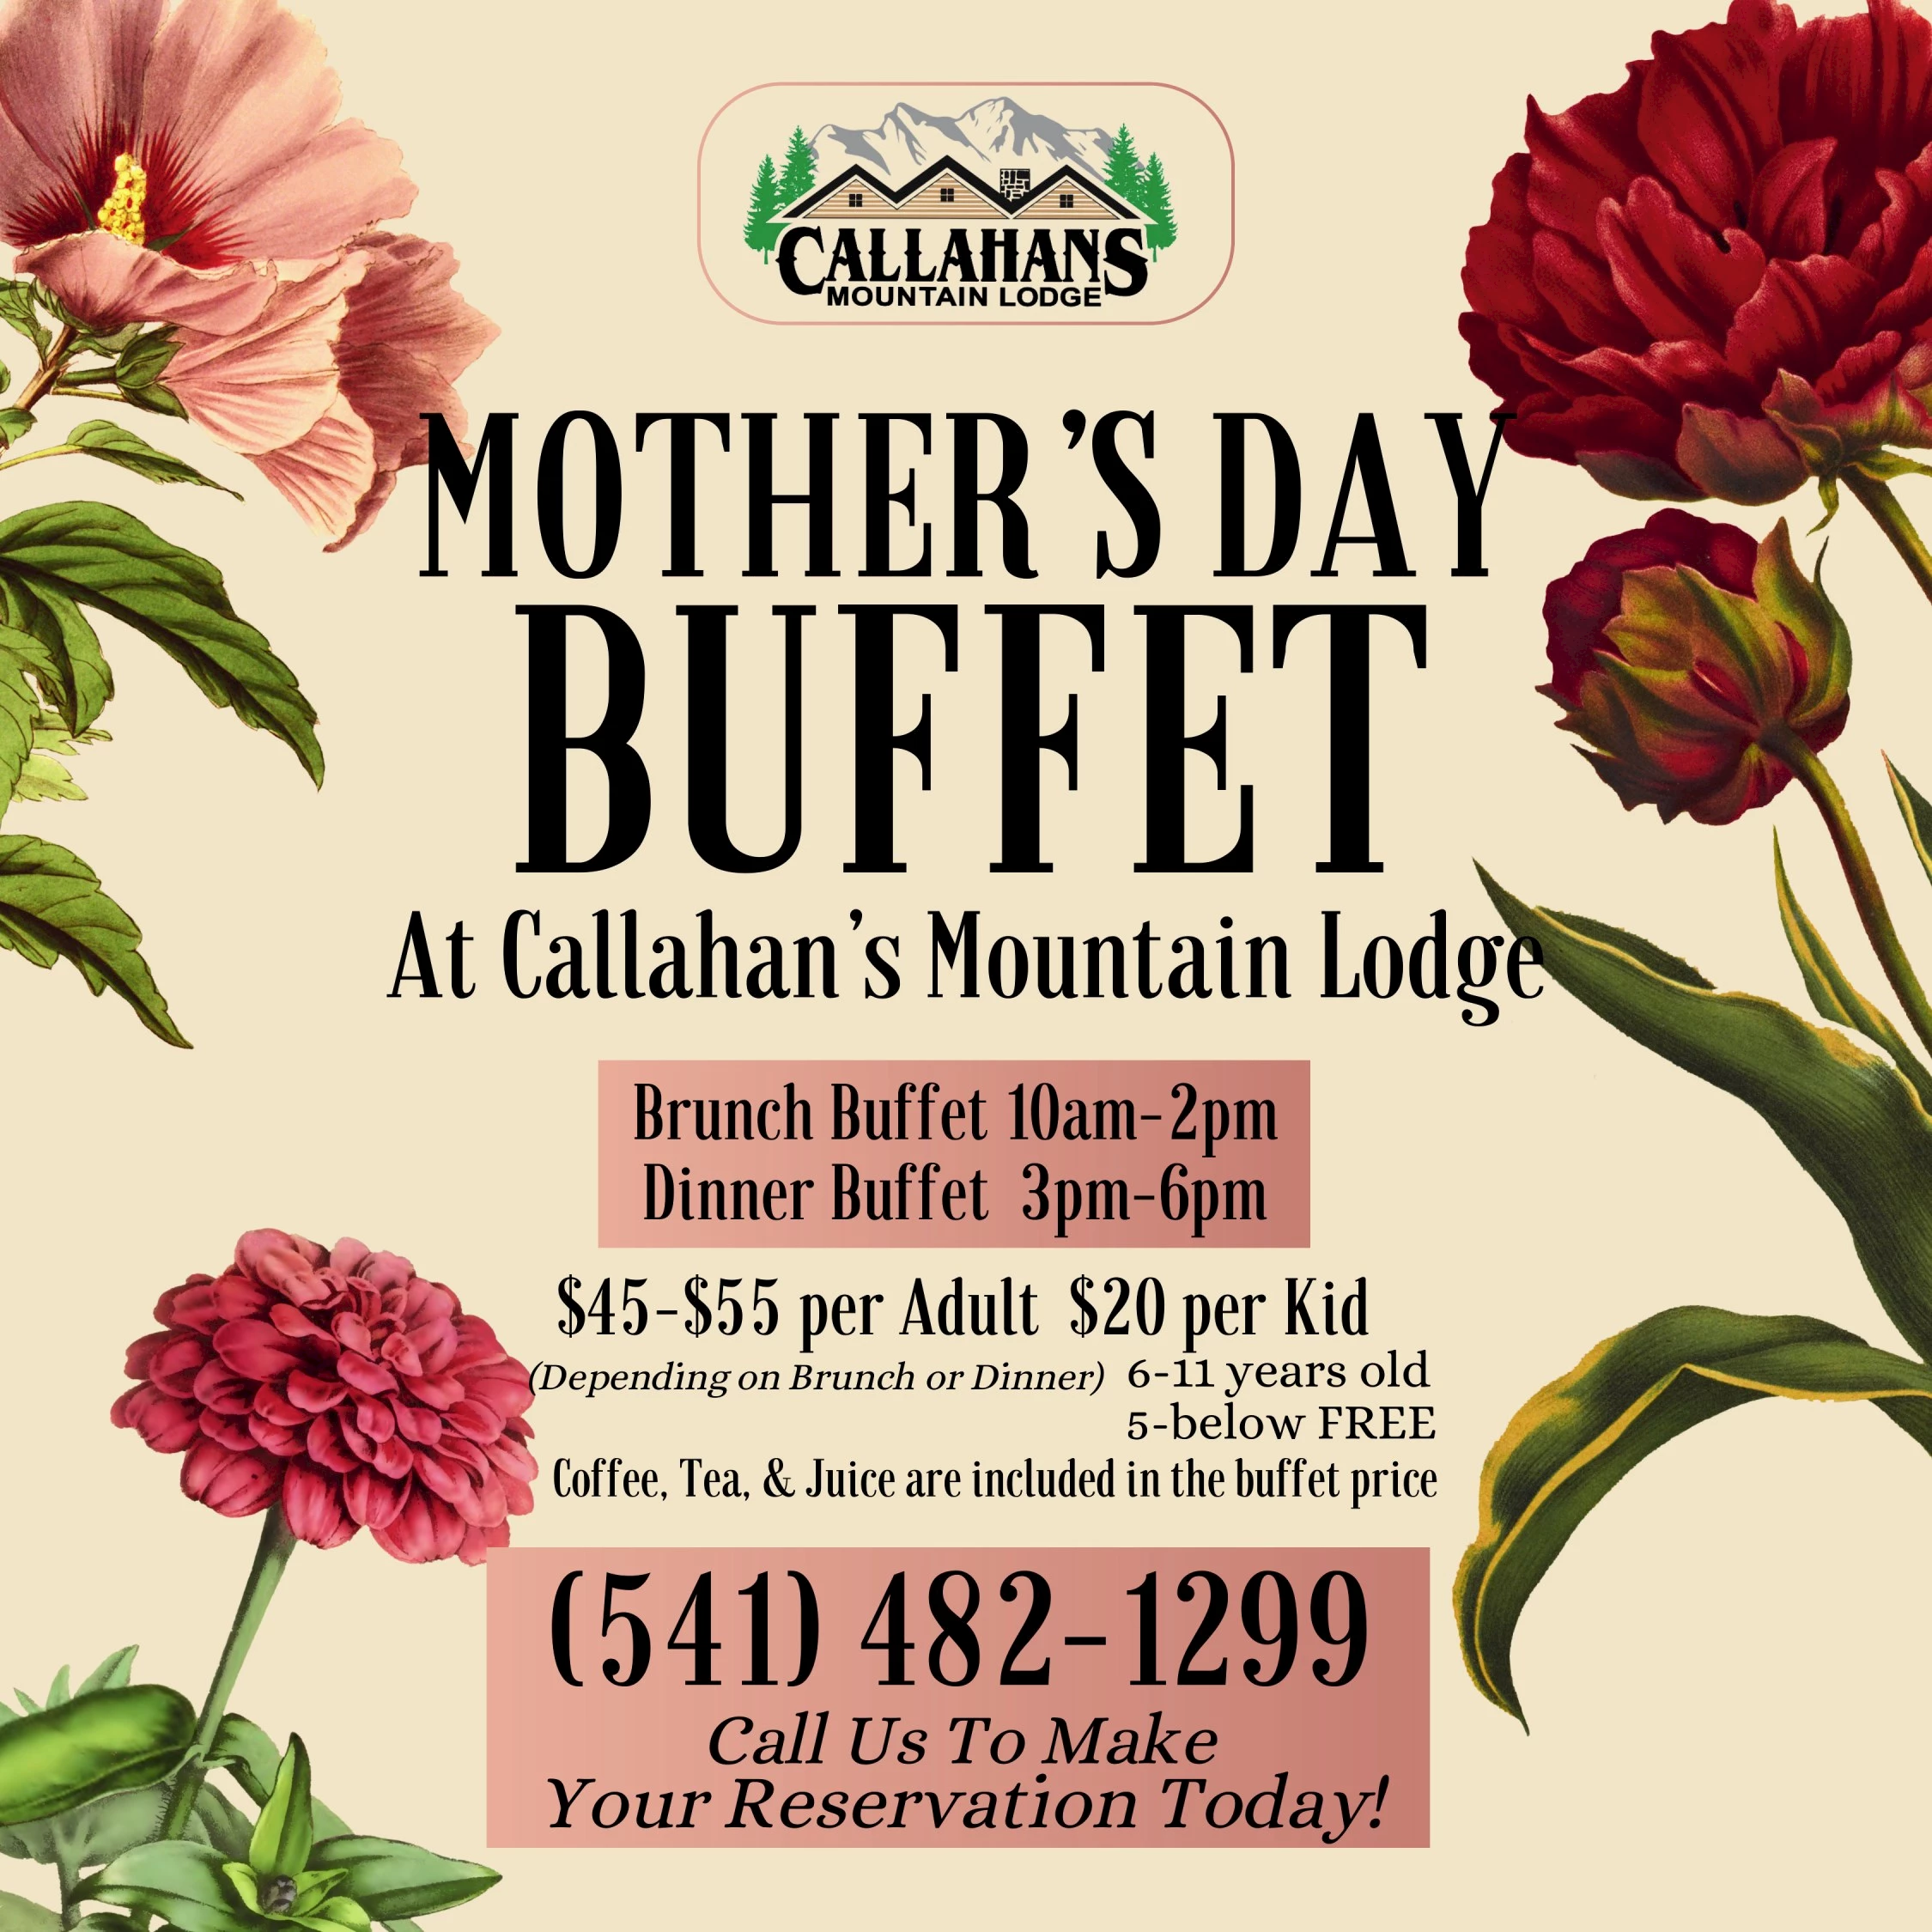 A Mother's Day Buffet is advertised for Callahan's Mountain Lodge, featuring brunch and dinner times, pricing details, and a reservation contact number.